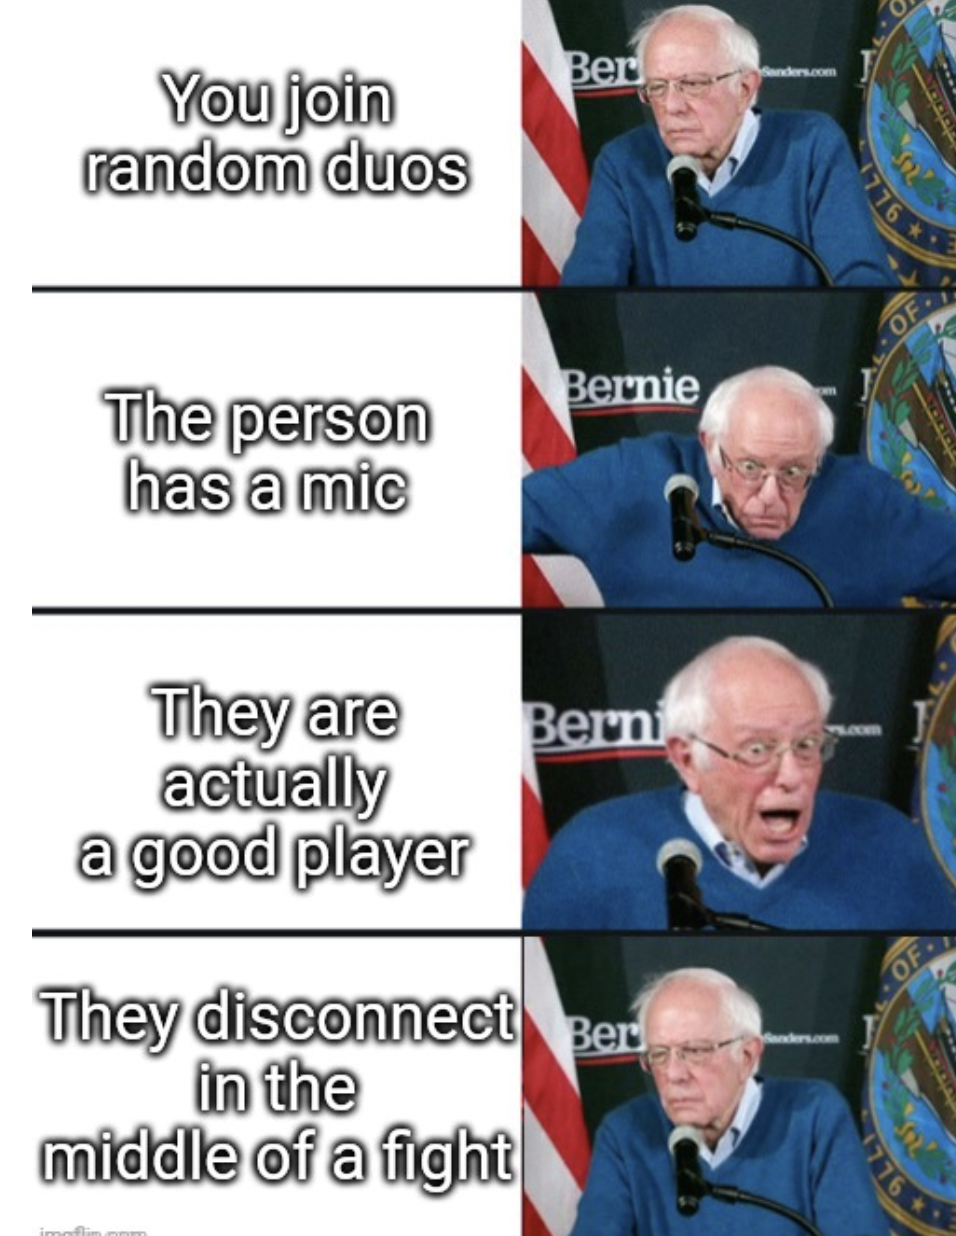 Gaming memes - Imgflip - You join random duos The person has a mic They are actually a good player Ber Bernie Berni They disconnect Ber in the middle of a fight